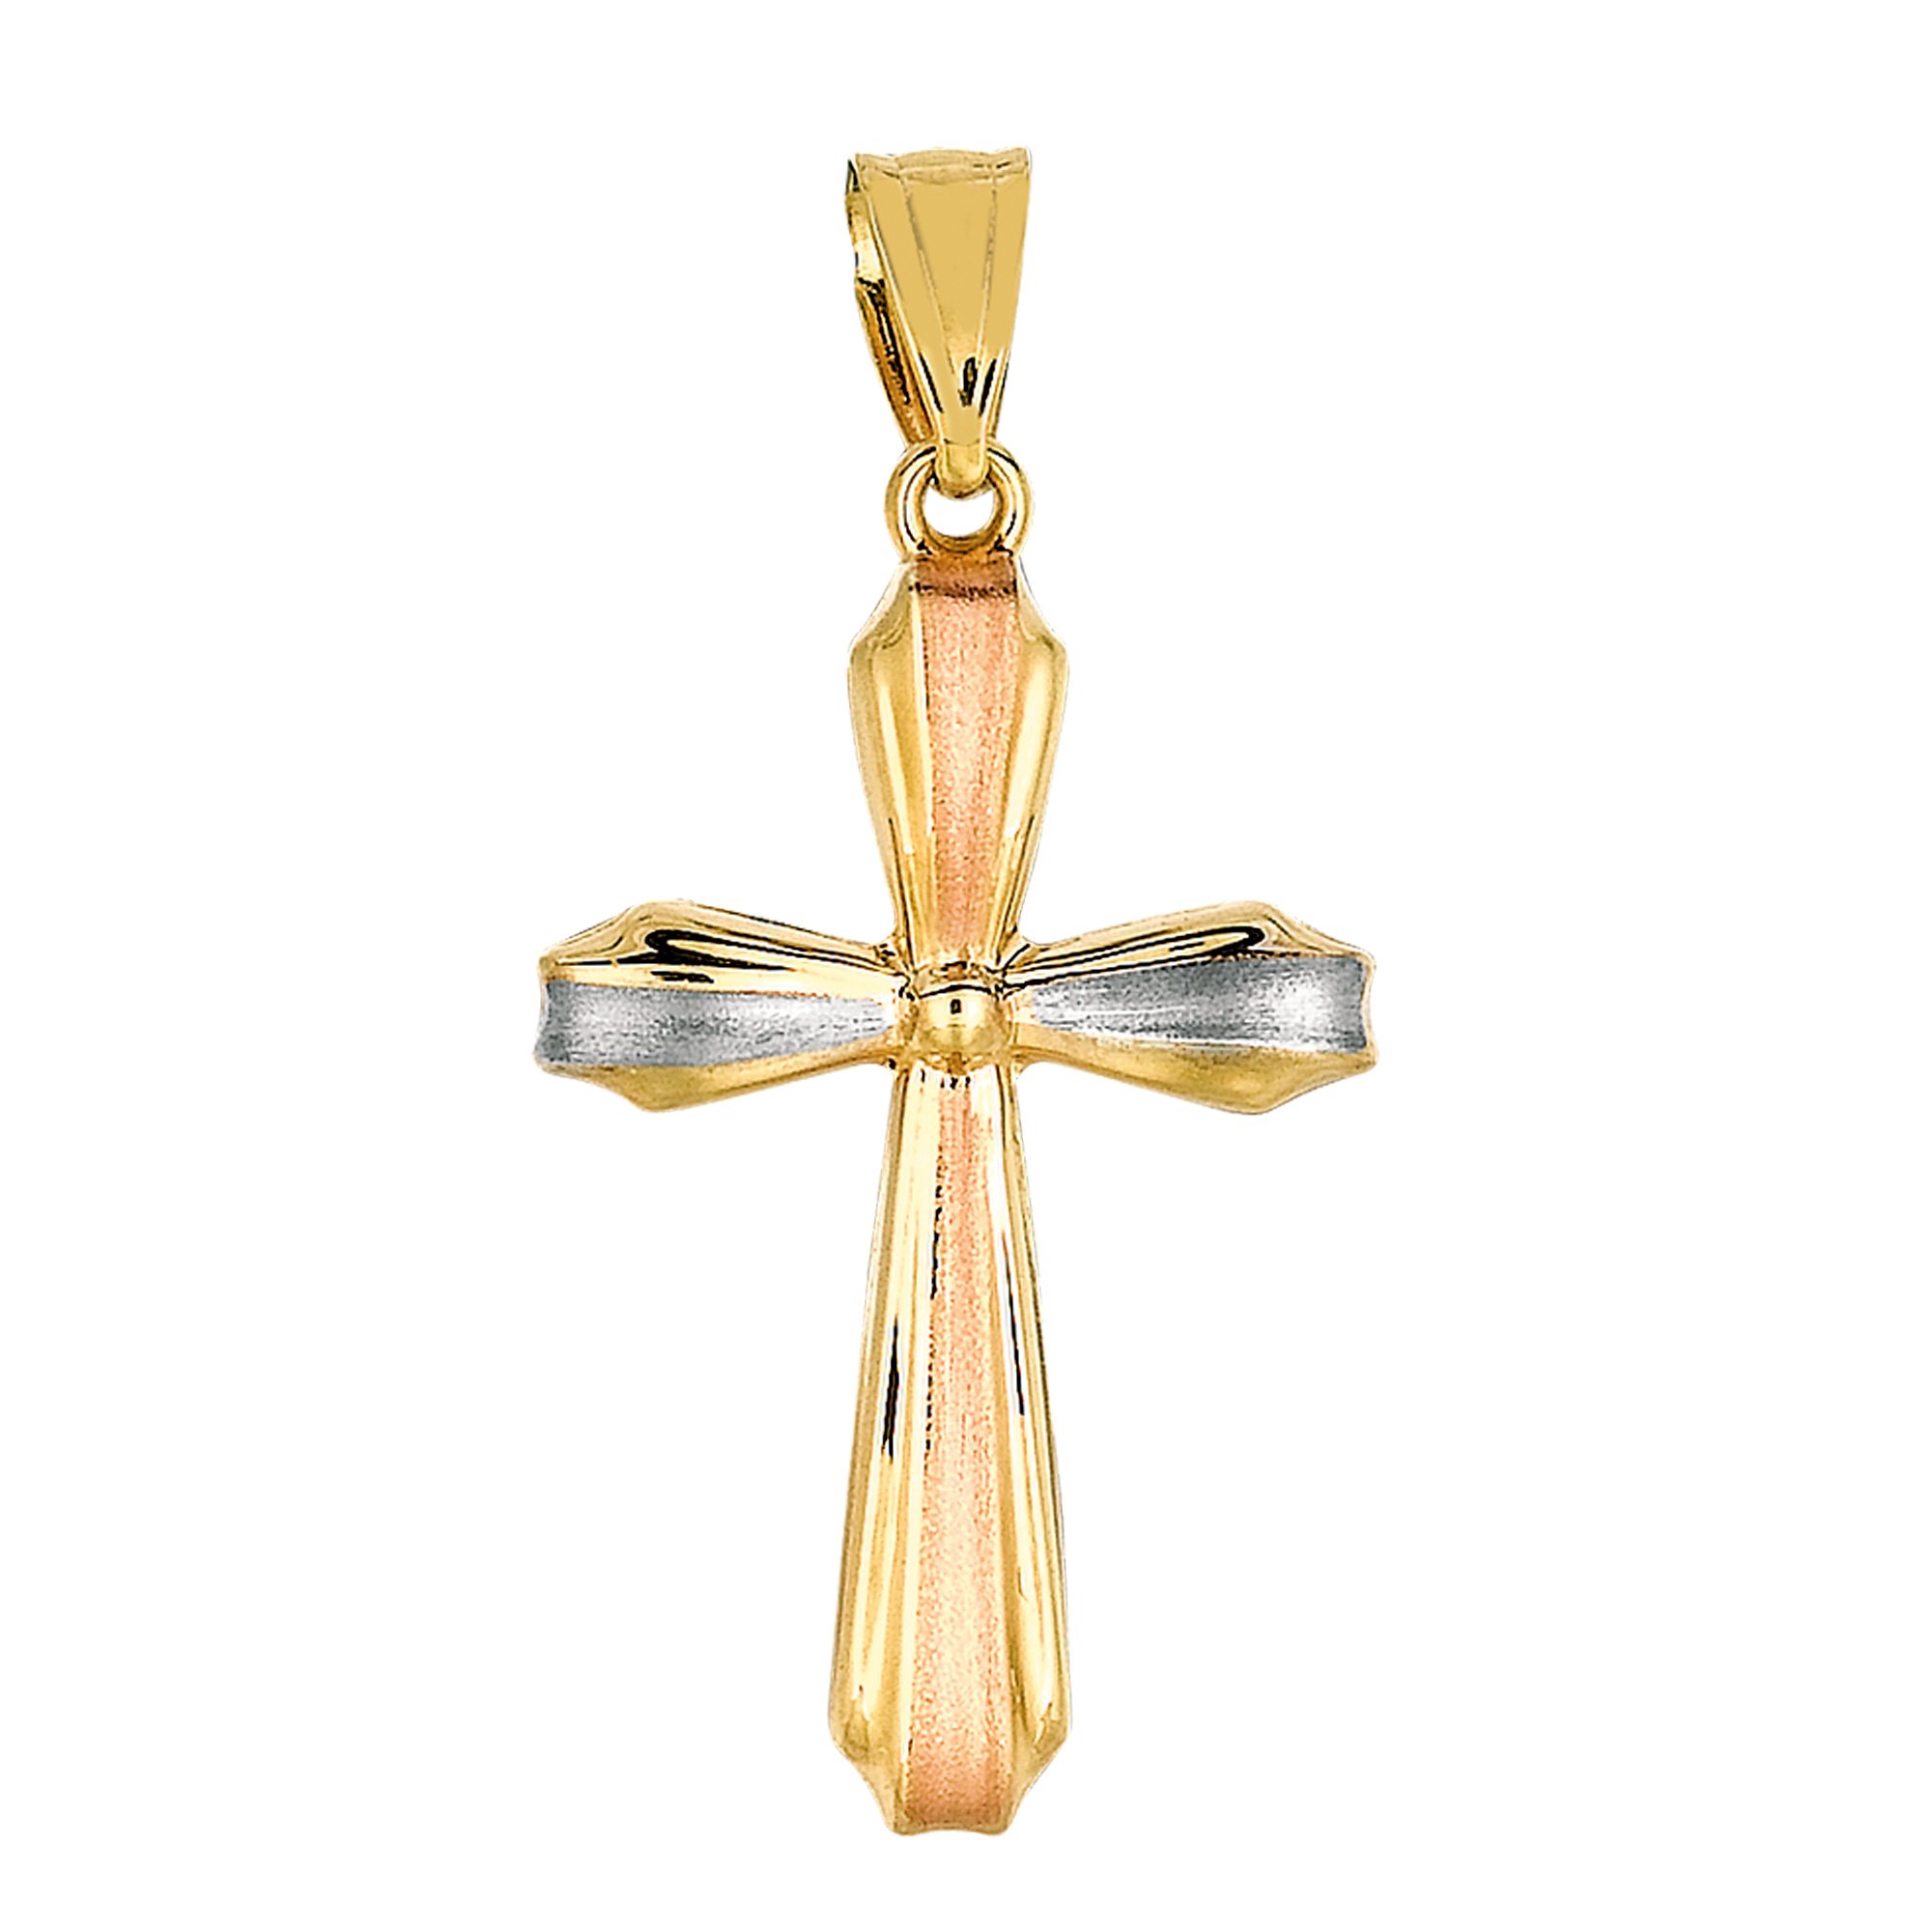 Jewelry Affairs 14k Tricolor Gold Satin And High Polish Finish Cross Pendant